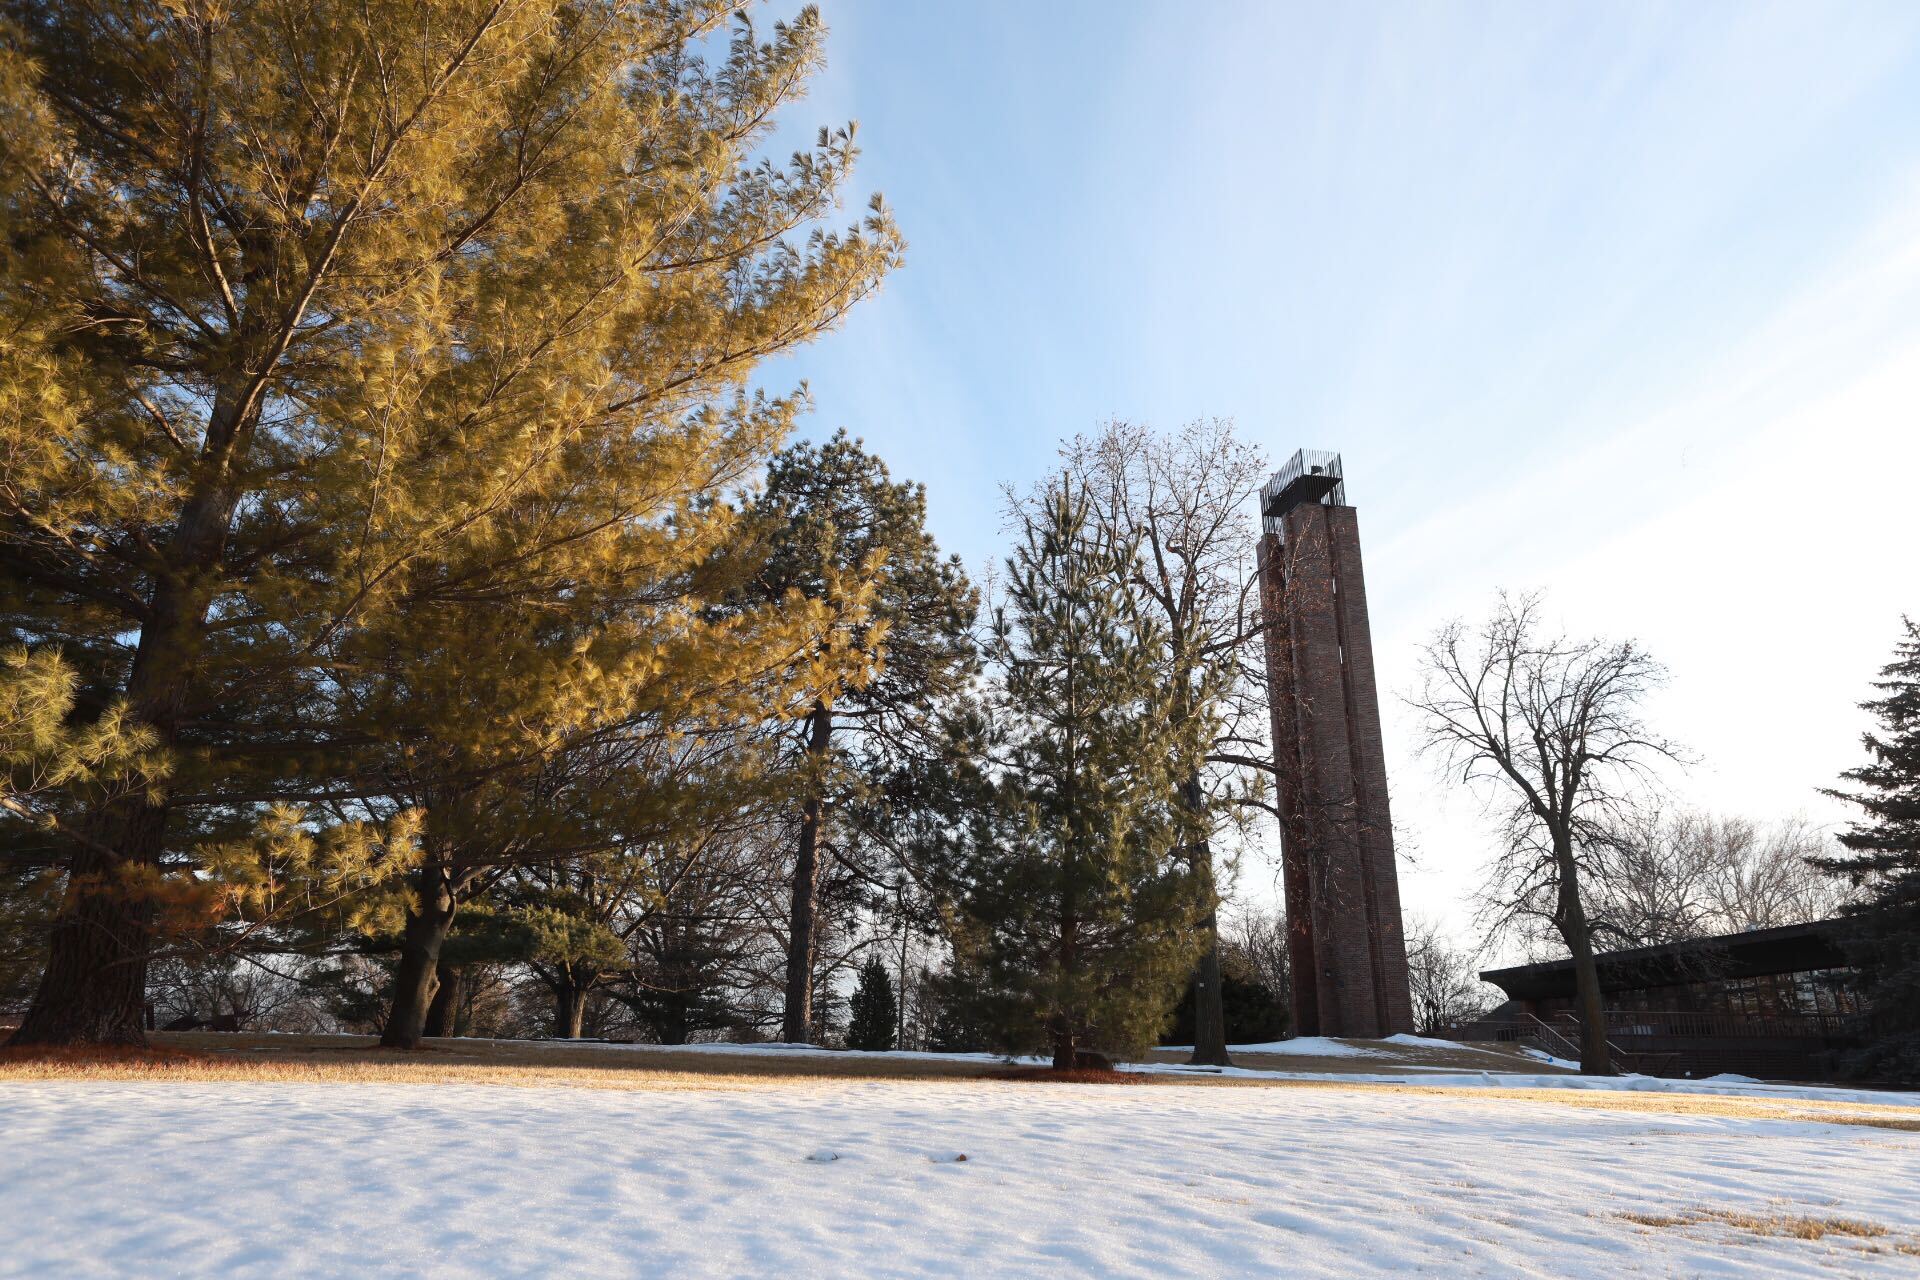 Image of Merrill Tower and surrounding trees. There is some snow on the ground, melted in some places to show brown grass peeking through. 